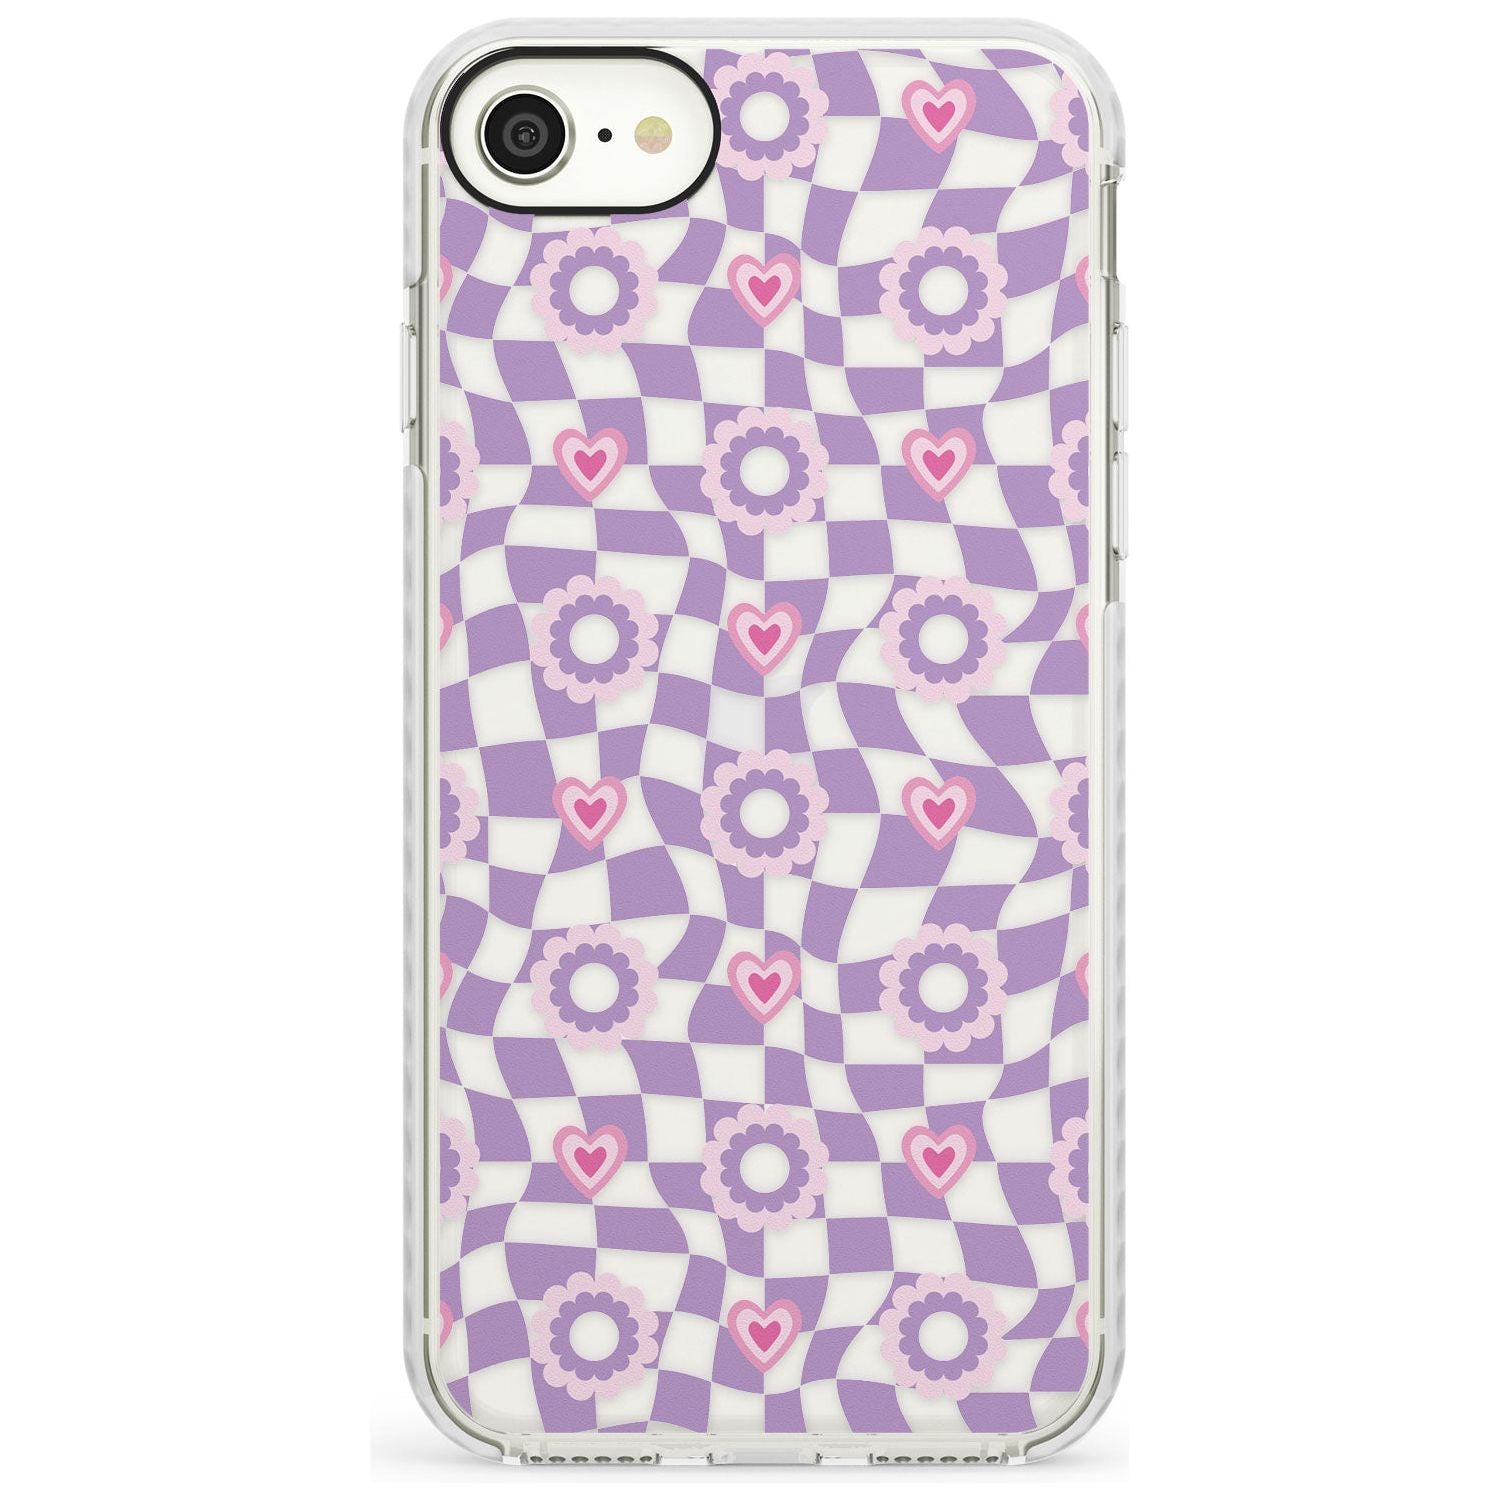 Checkered Love Pattern Impact Phone Case for iPhone SE 8 7 Plus